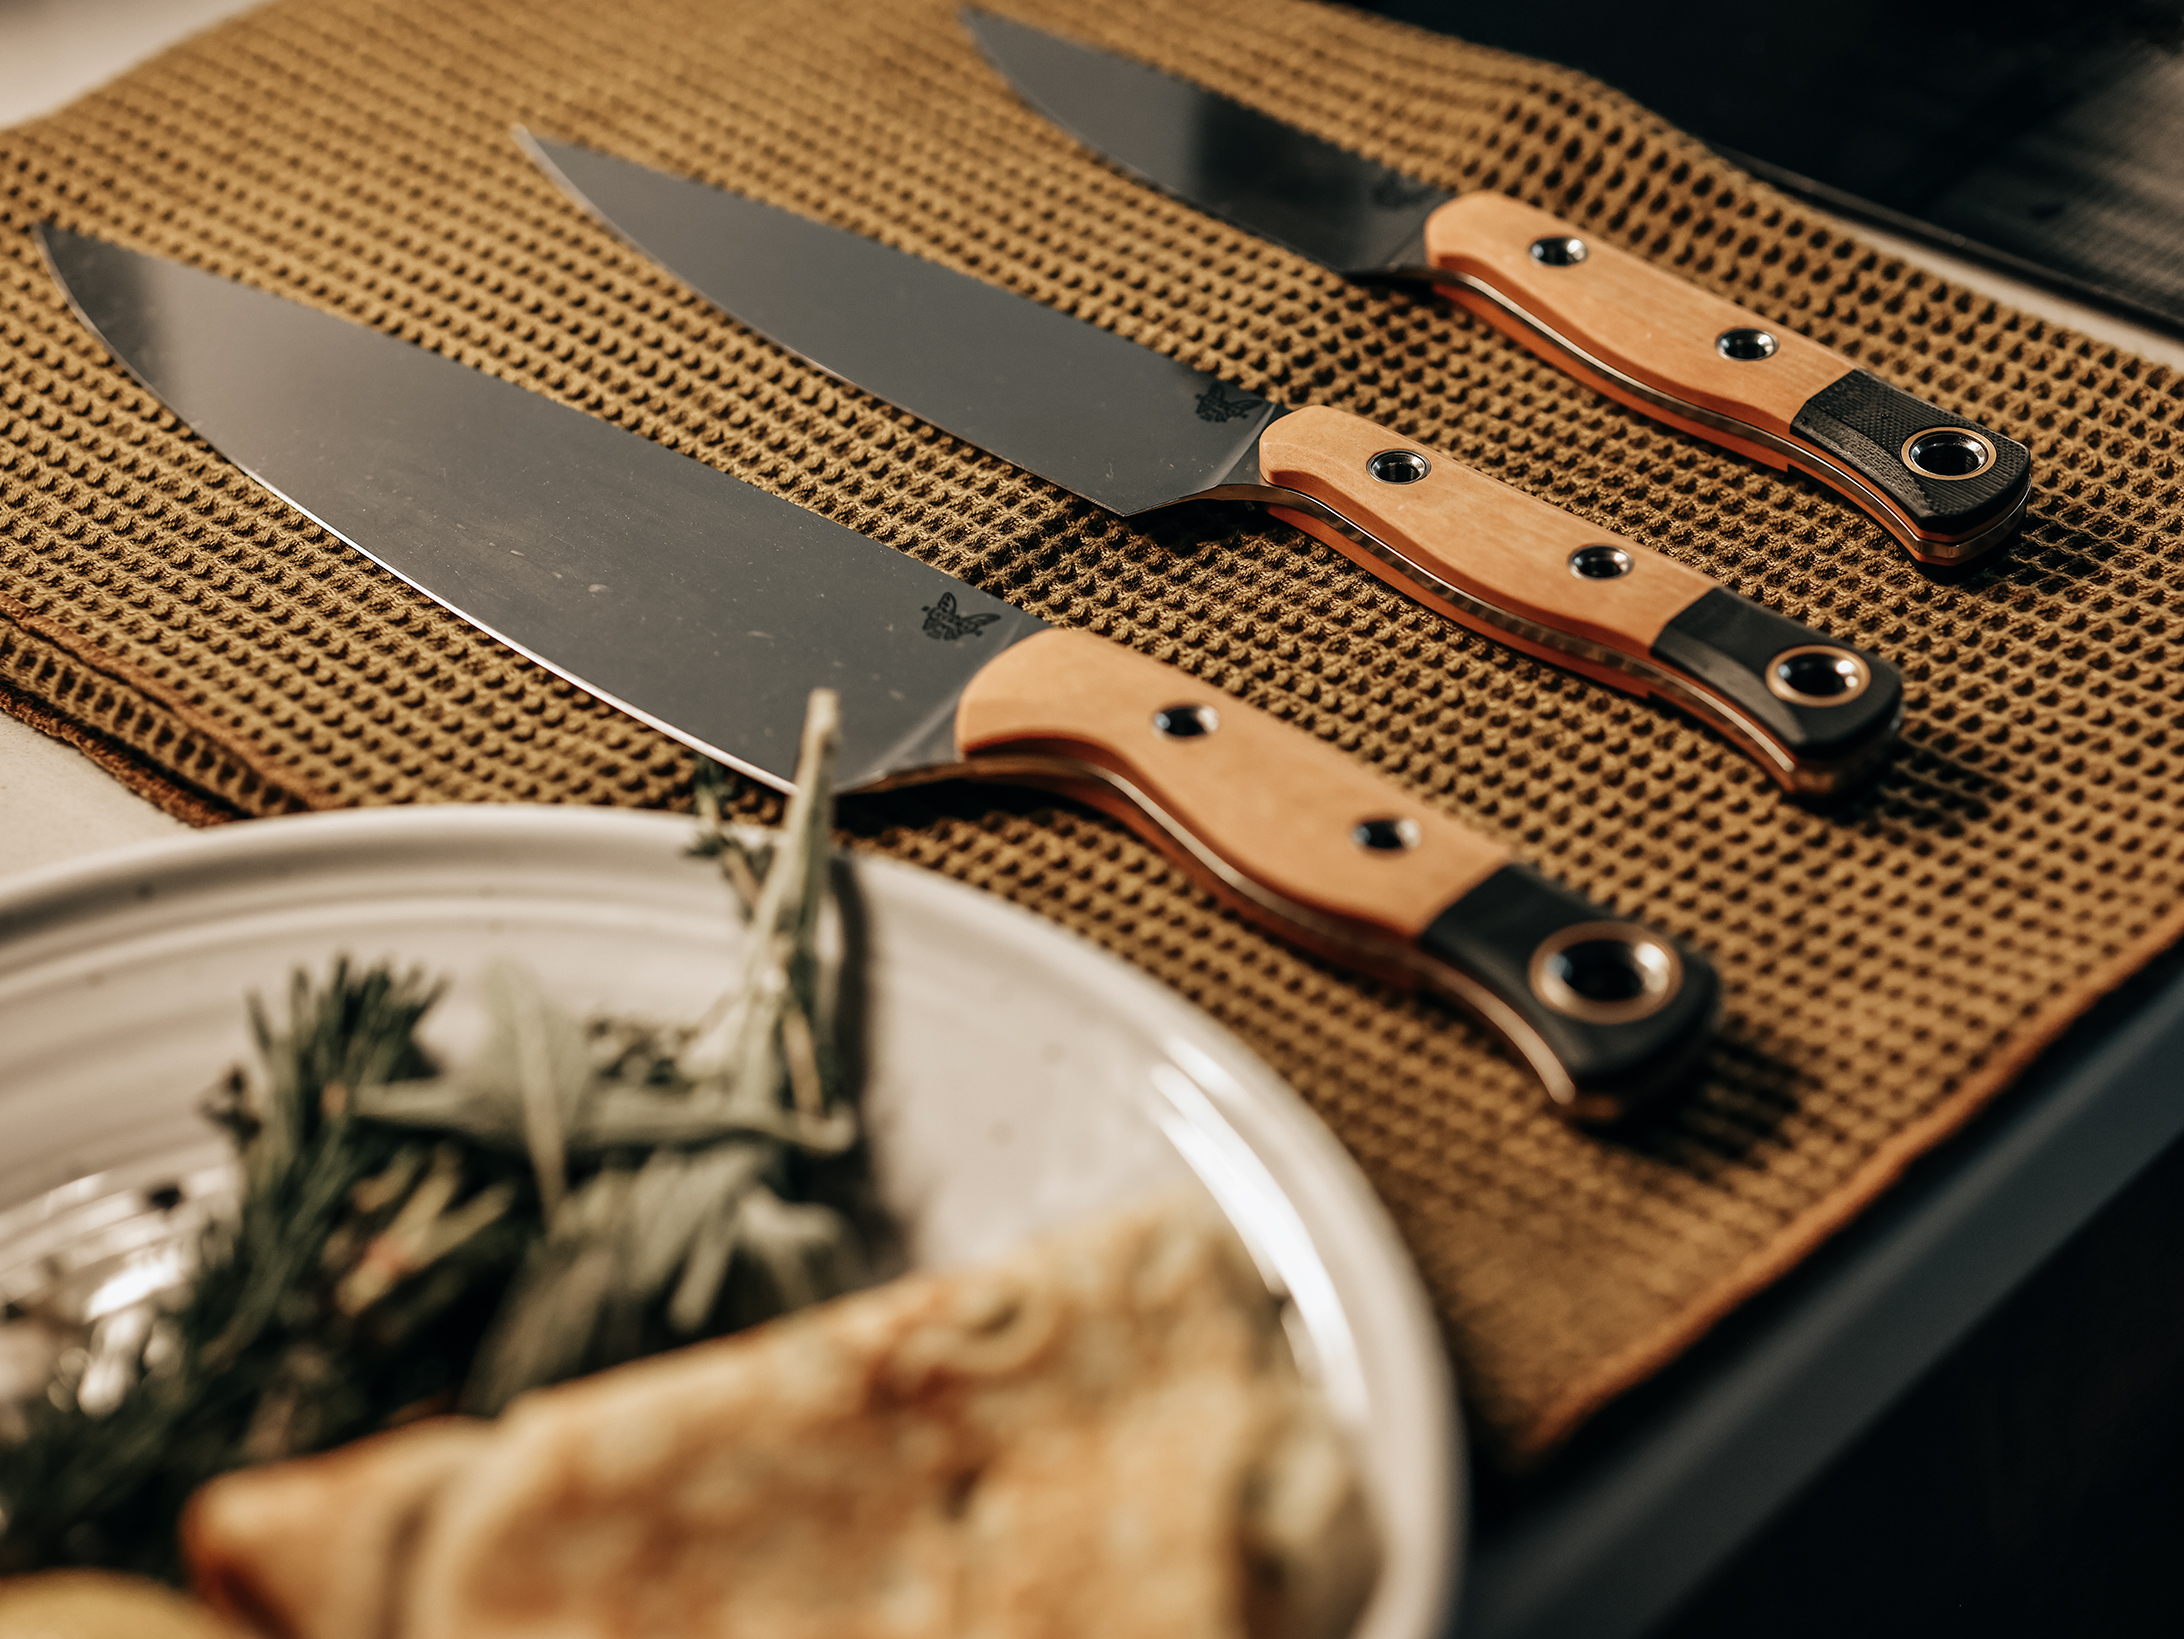 Benchmade Three-Piece Chef's Knife Set Review: Light and Sharp